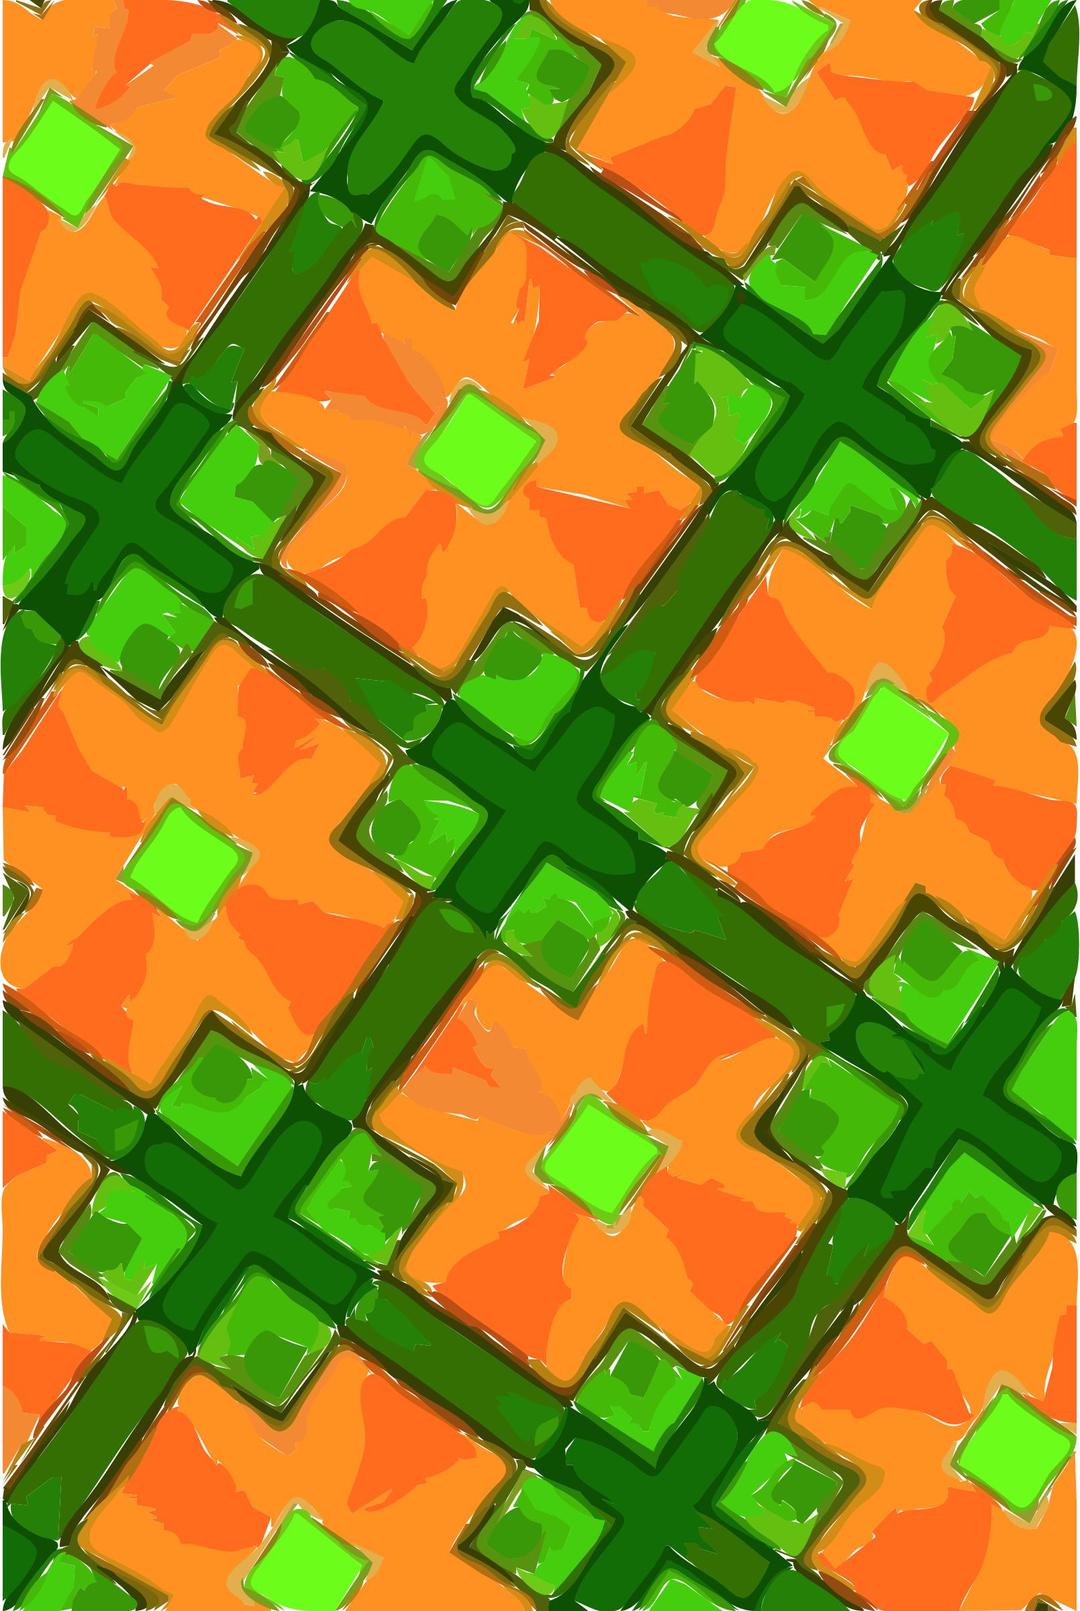 Abstract Image Orange and Green png transparent